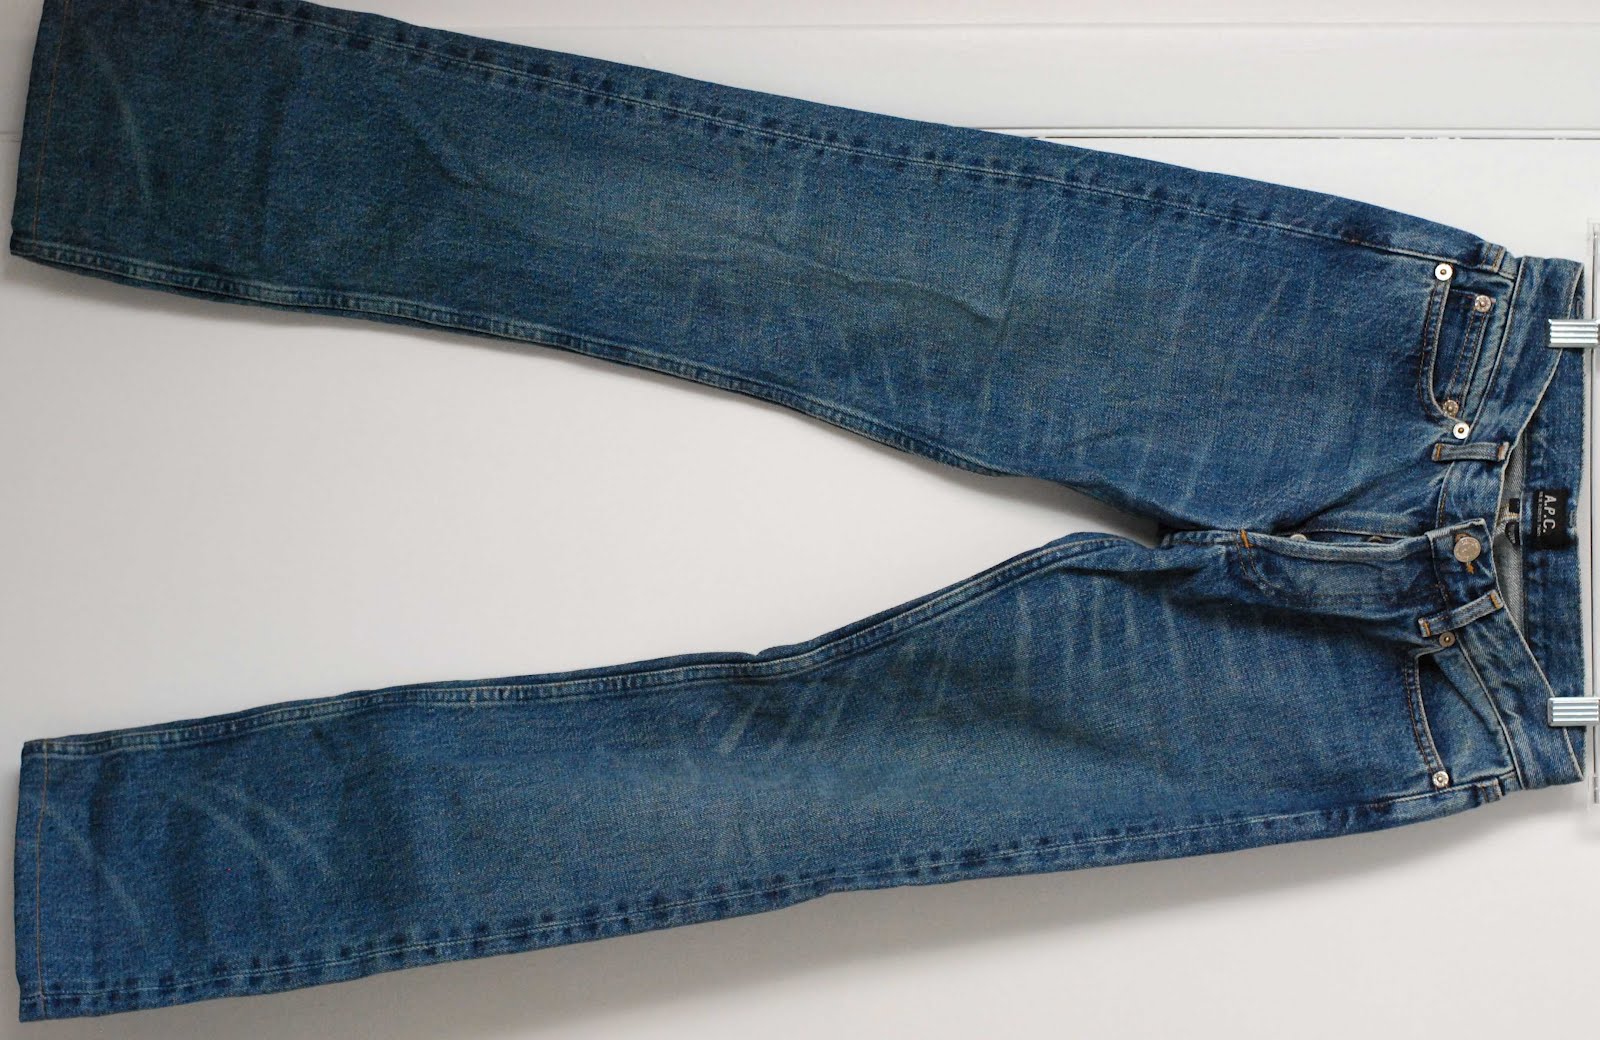 laws of general economy: A.P.C. Hipster Jeans size 25